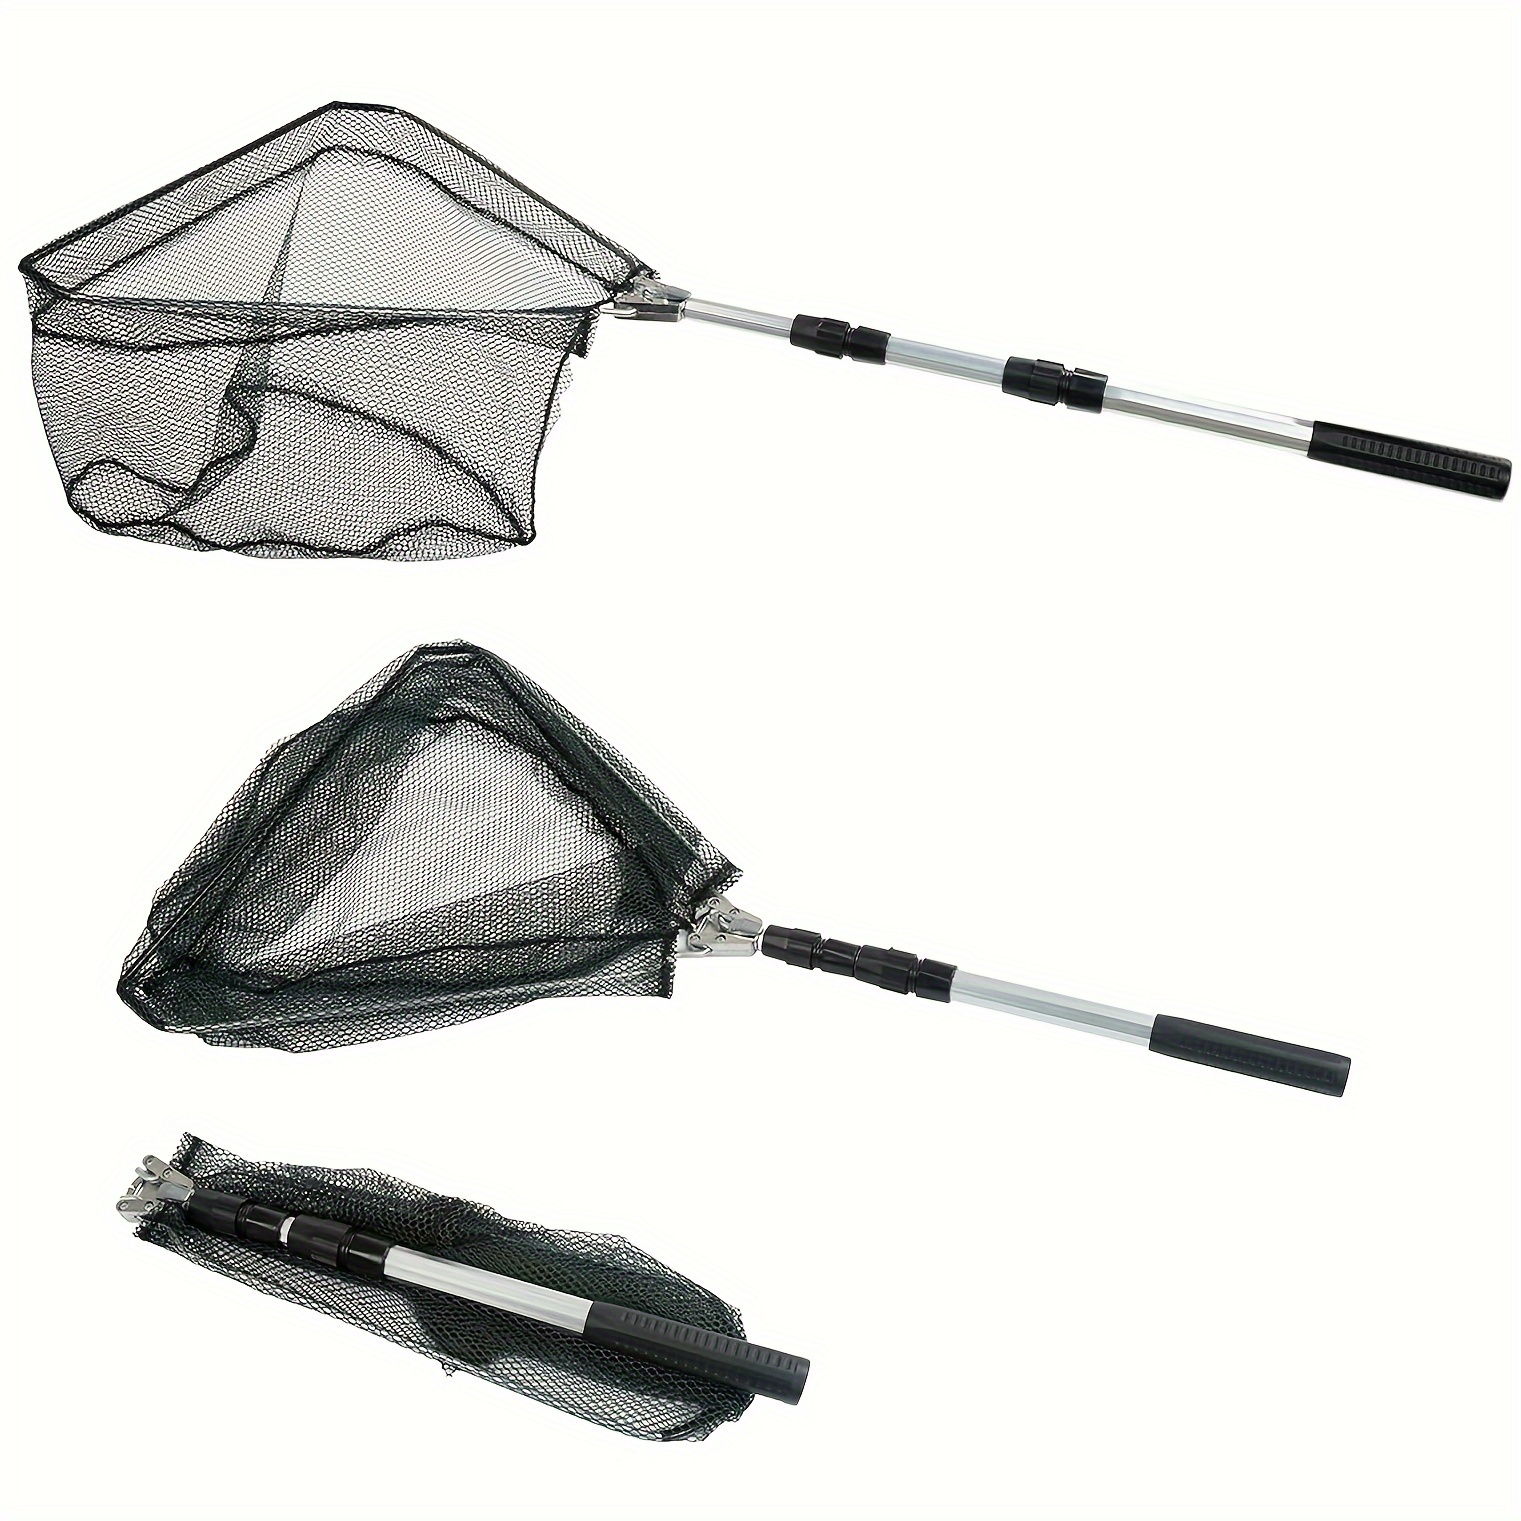 

1pc Aluminum Alloy Collapsible Fishing Net - Can Extend To A Full Length Of 1.5 Meters